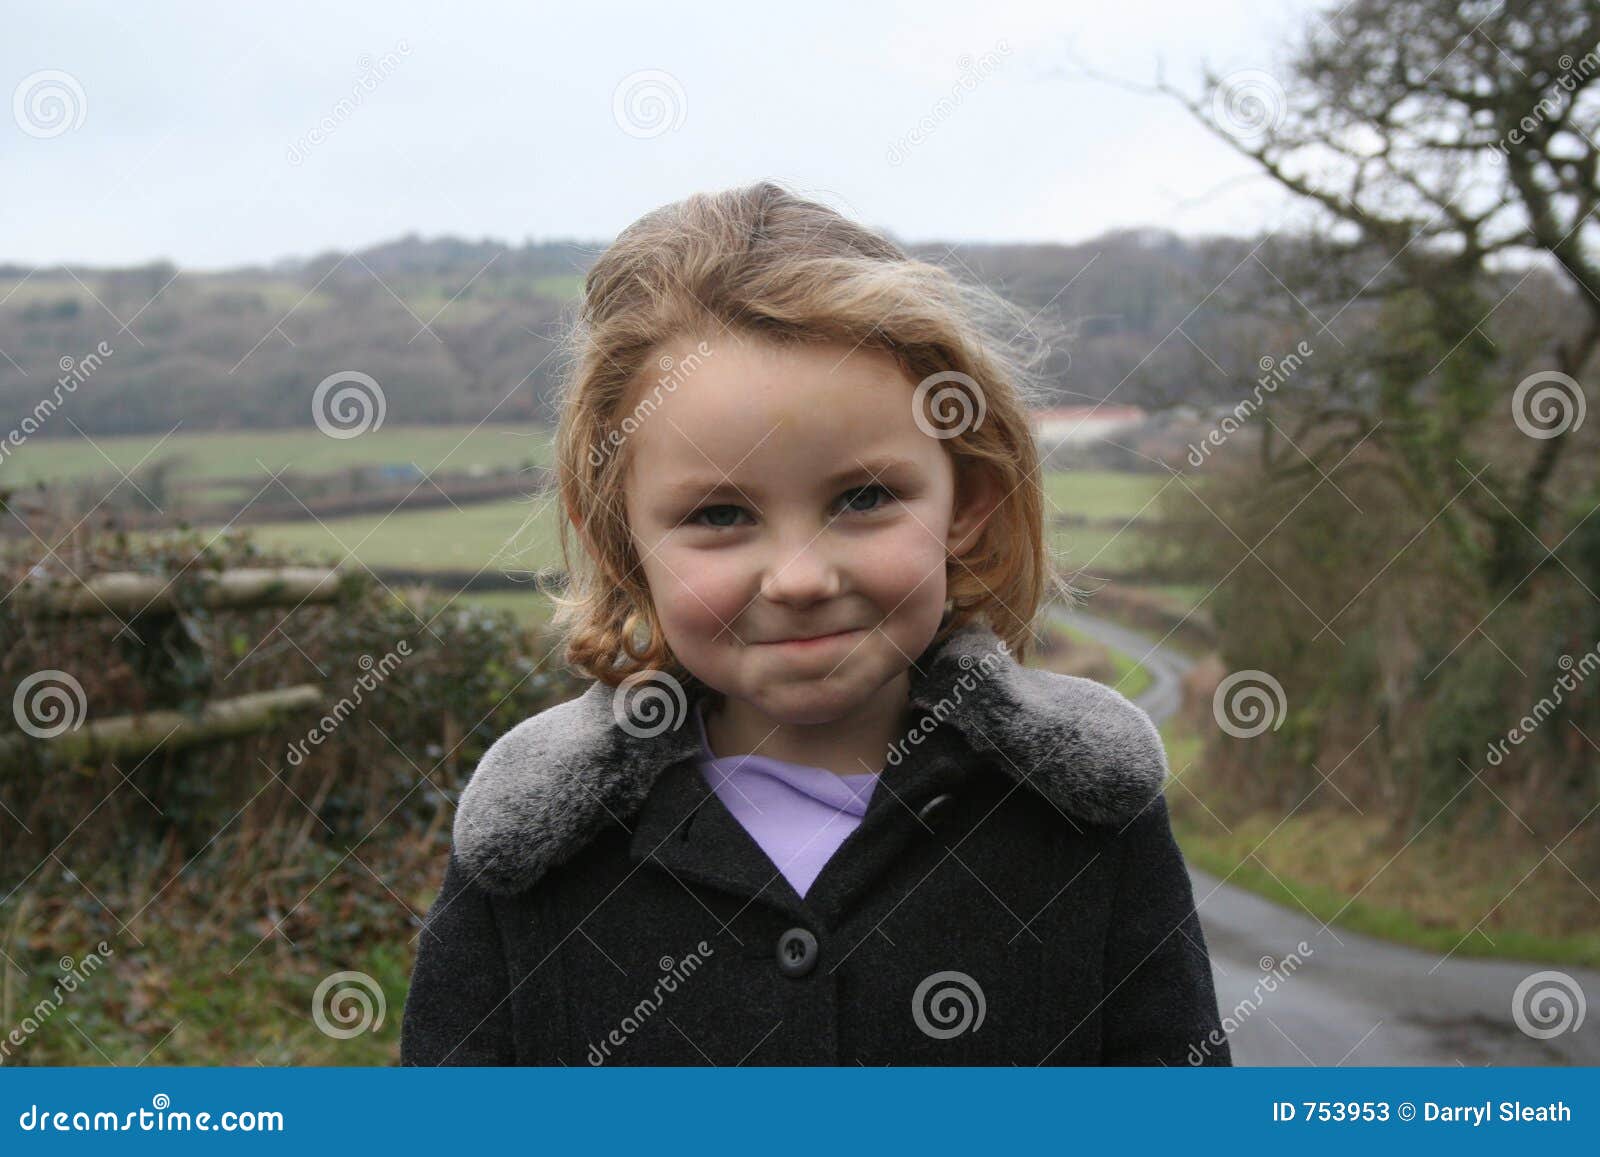 cheeky looking girl on country walk